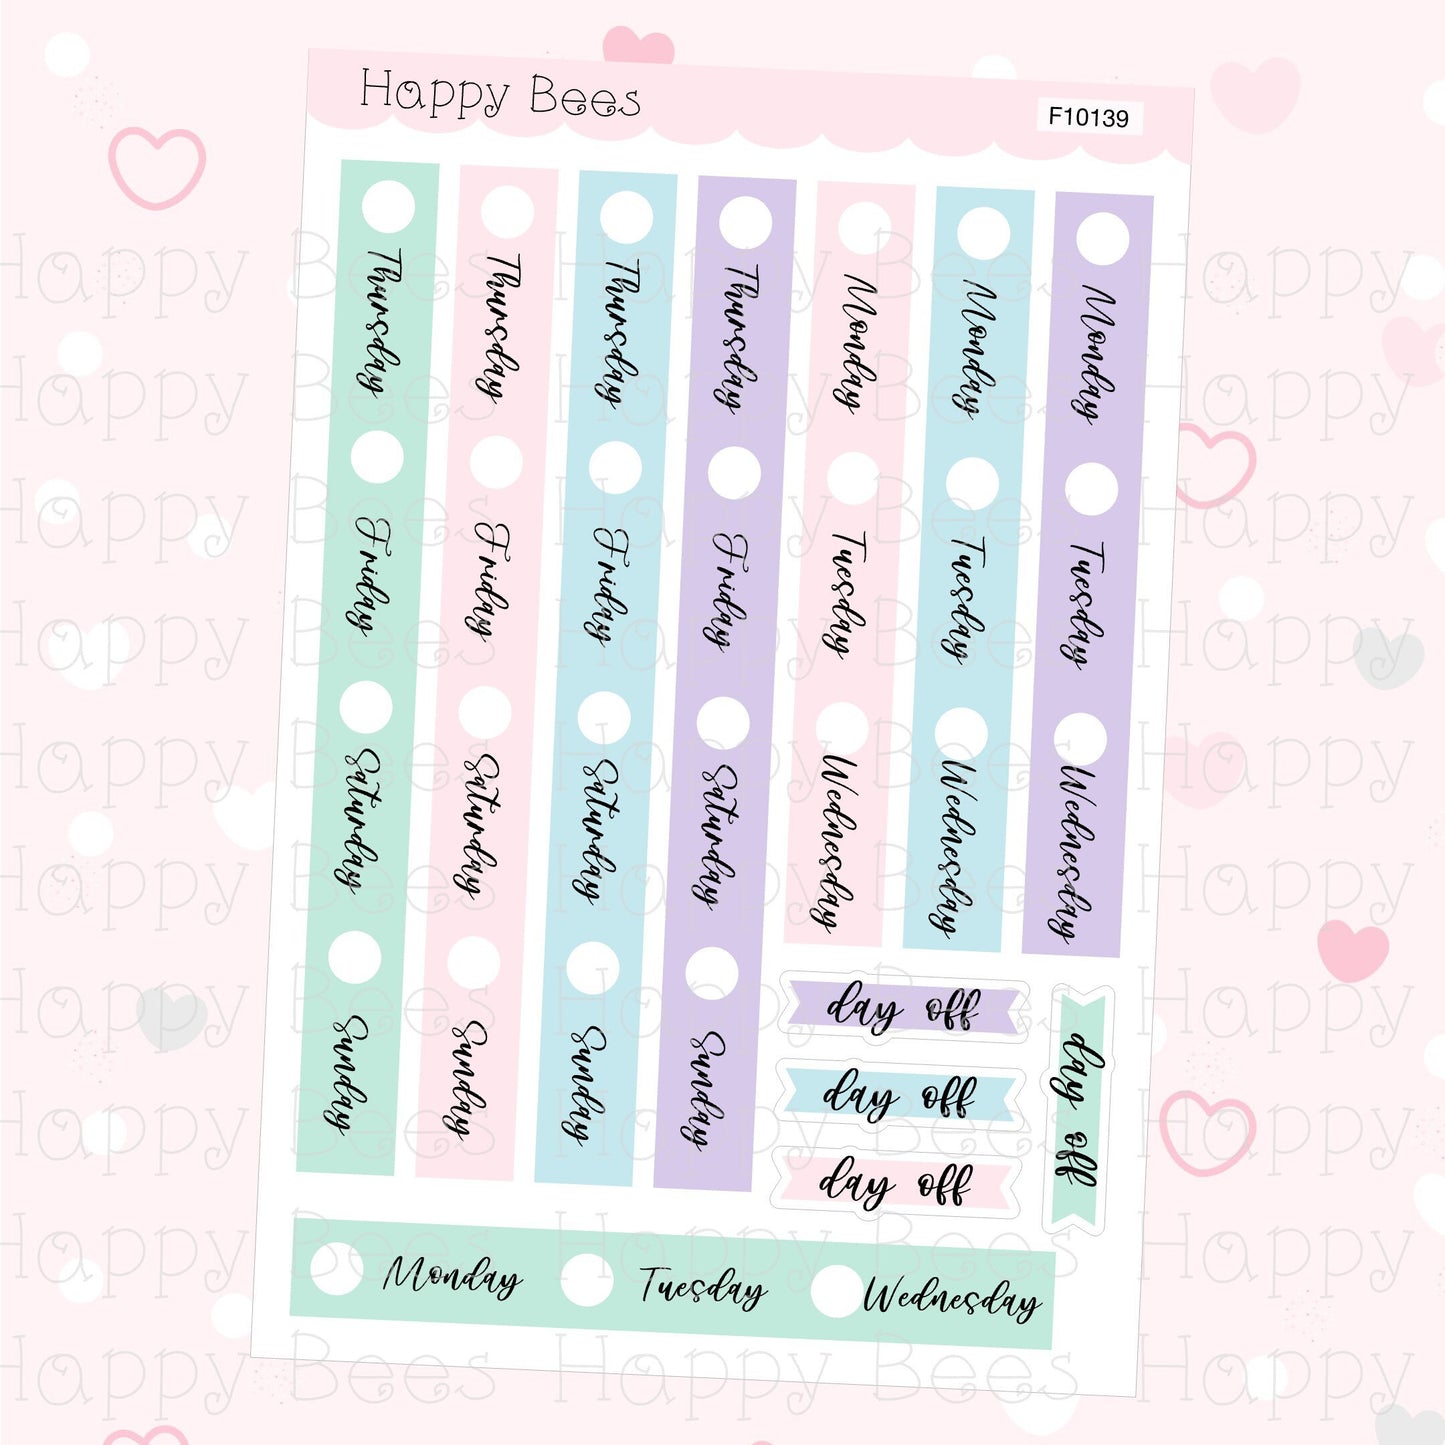 Weekly Date Covers & Day Off - Functional Cute Hobonichi Cousin Planner Stickers F10139